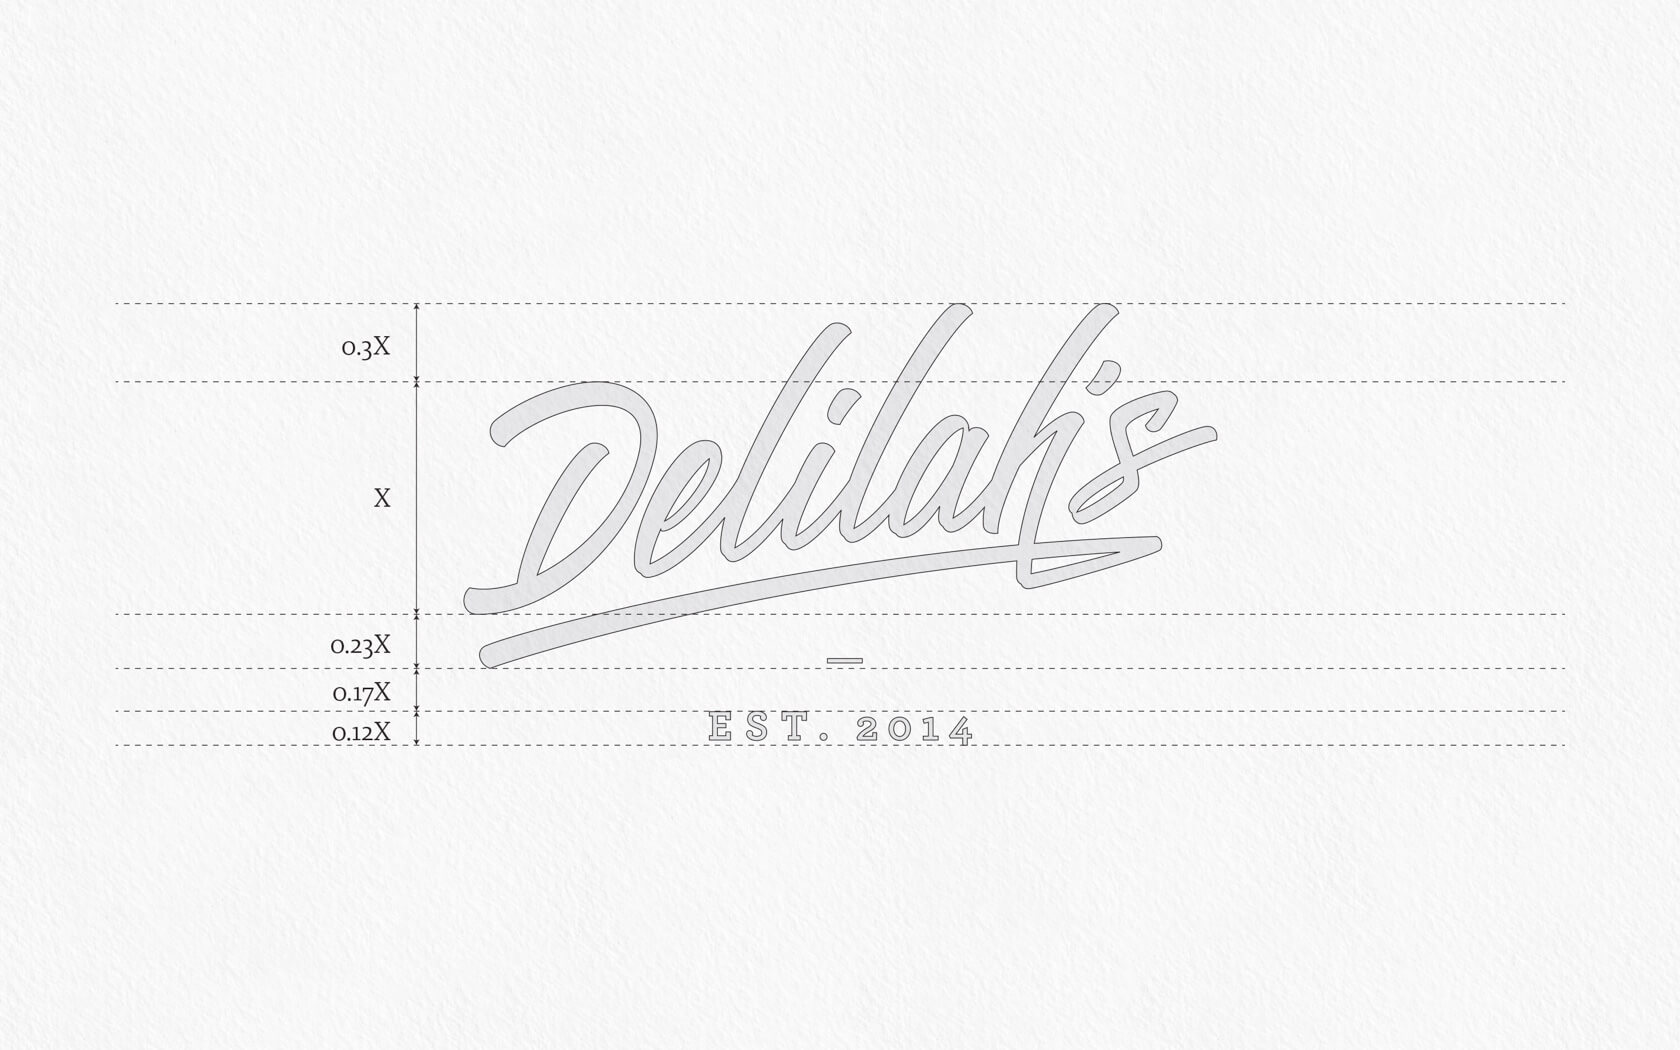 Delilah’s. Brand logo with architectural grid